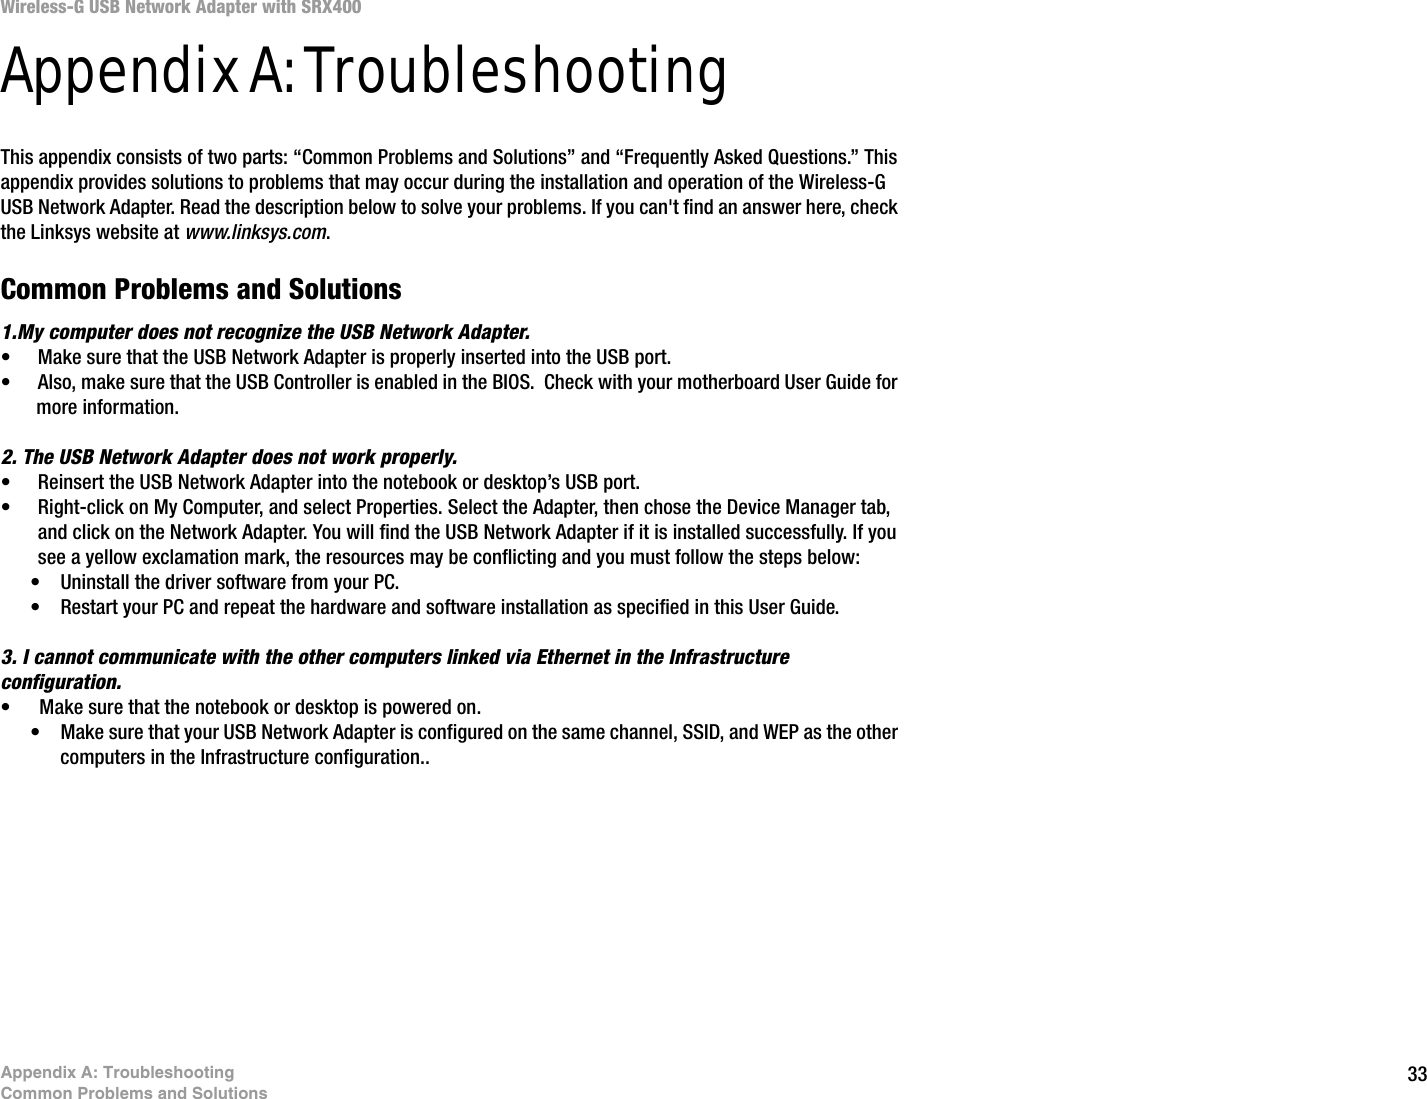 33Appendix A: TroubleshootingCommon Problems and SolutionsWireless-G USB Network Adapter with SRX400Appendix A: TroubleshootingThis appendix consists of two parts: “Common Problems and Solutions” and “Frequently Asked Questions.” This appendix provides solutions to problems that may occur during the installation and operation of the Wireless-G USB Network Adapter. Read the description below to solve your problems. If you can&apos;t find an answer here, check the Linksys website at www.linksys.com.Common Problems and Solutions1.My computer does not recognize the USB Network Adapter.• Make sure that the USB Network Adapter is properly inserted into the USB port.• Also, make sure that the USB Controller is enabled in the BIOS.  Check with your motherboard User Guide for more information.2. The USB Network Adapter does not work properly.• Reinsert the USB Network Adapter into the notebook or desktop’s USB port. • Right-click on My Computer, and select Properties. Select the Adapter, then chose the Device Manager tab, and click on the Network Adapter. You will find the USB Network Adapter if it is installed successfully. If you see a yellow exclamation mark, the resources may be conflicting and you must follow the steps below:• Uninstall the driver software from your PC.• Restart your PC and repeat the hardware and software installation as specified in this User Guide.3. I cannot communicate with the other computers linked via Ethernet in the Infrastructure configuration.• Make sure that the notebook or desktop is powered on.• Make sure that your USB Network Adapter is configured on the same channel, SSID, and WEP as the other computers in the Infrastructure configuration..